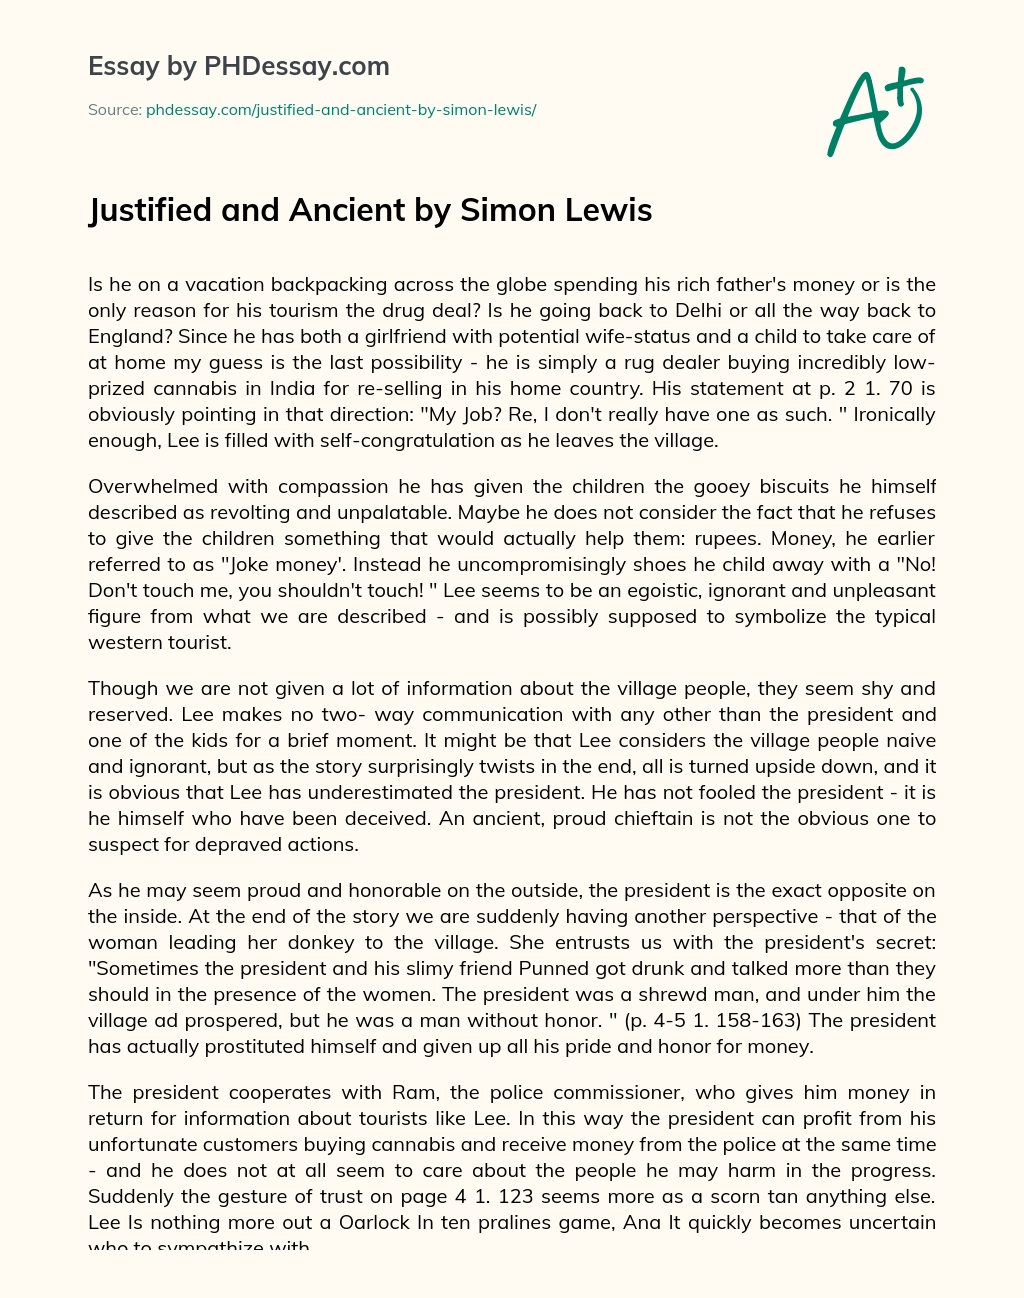 Justified and Ancient by Simon Lewis essay